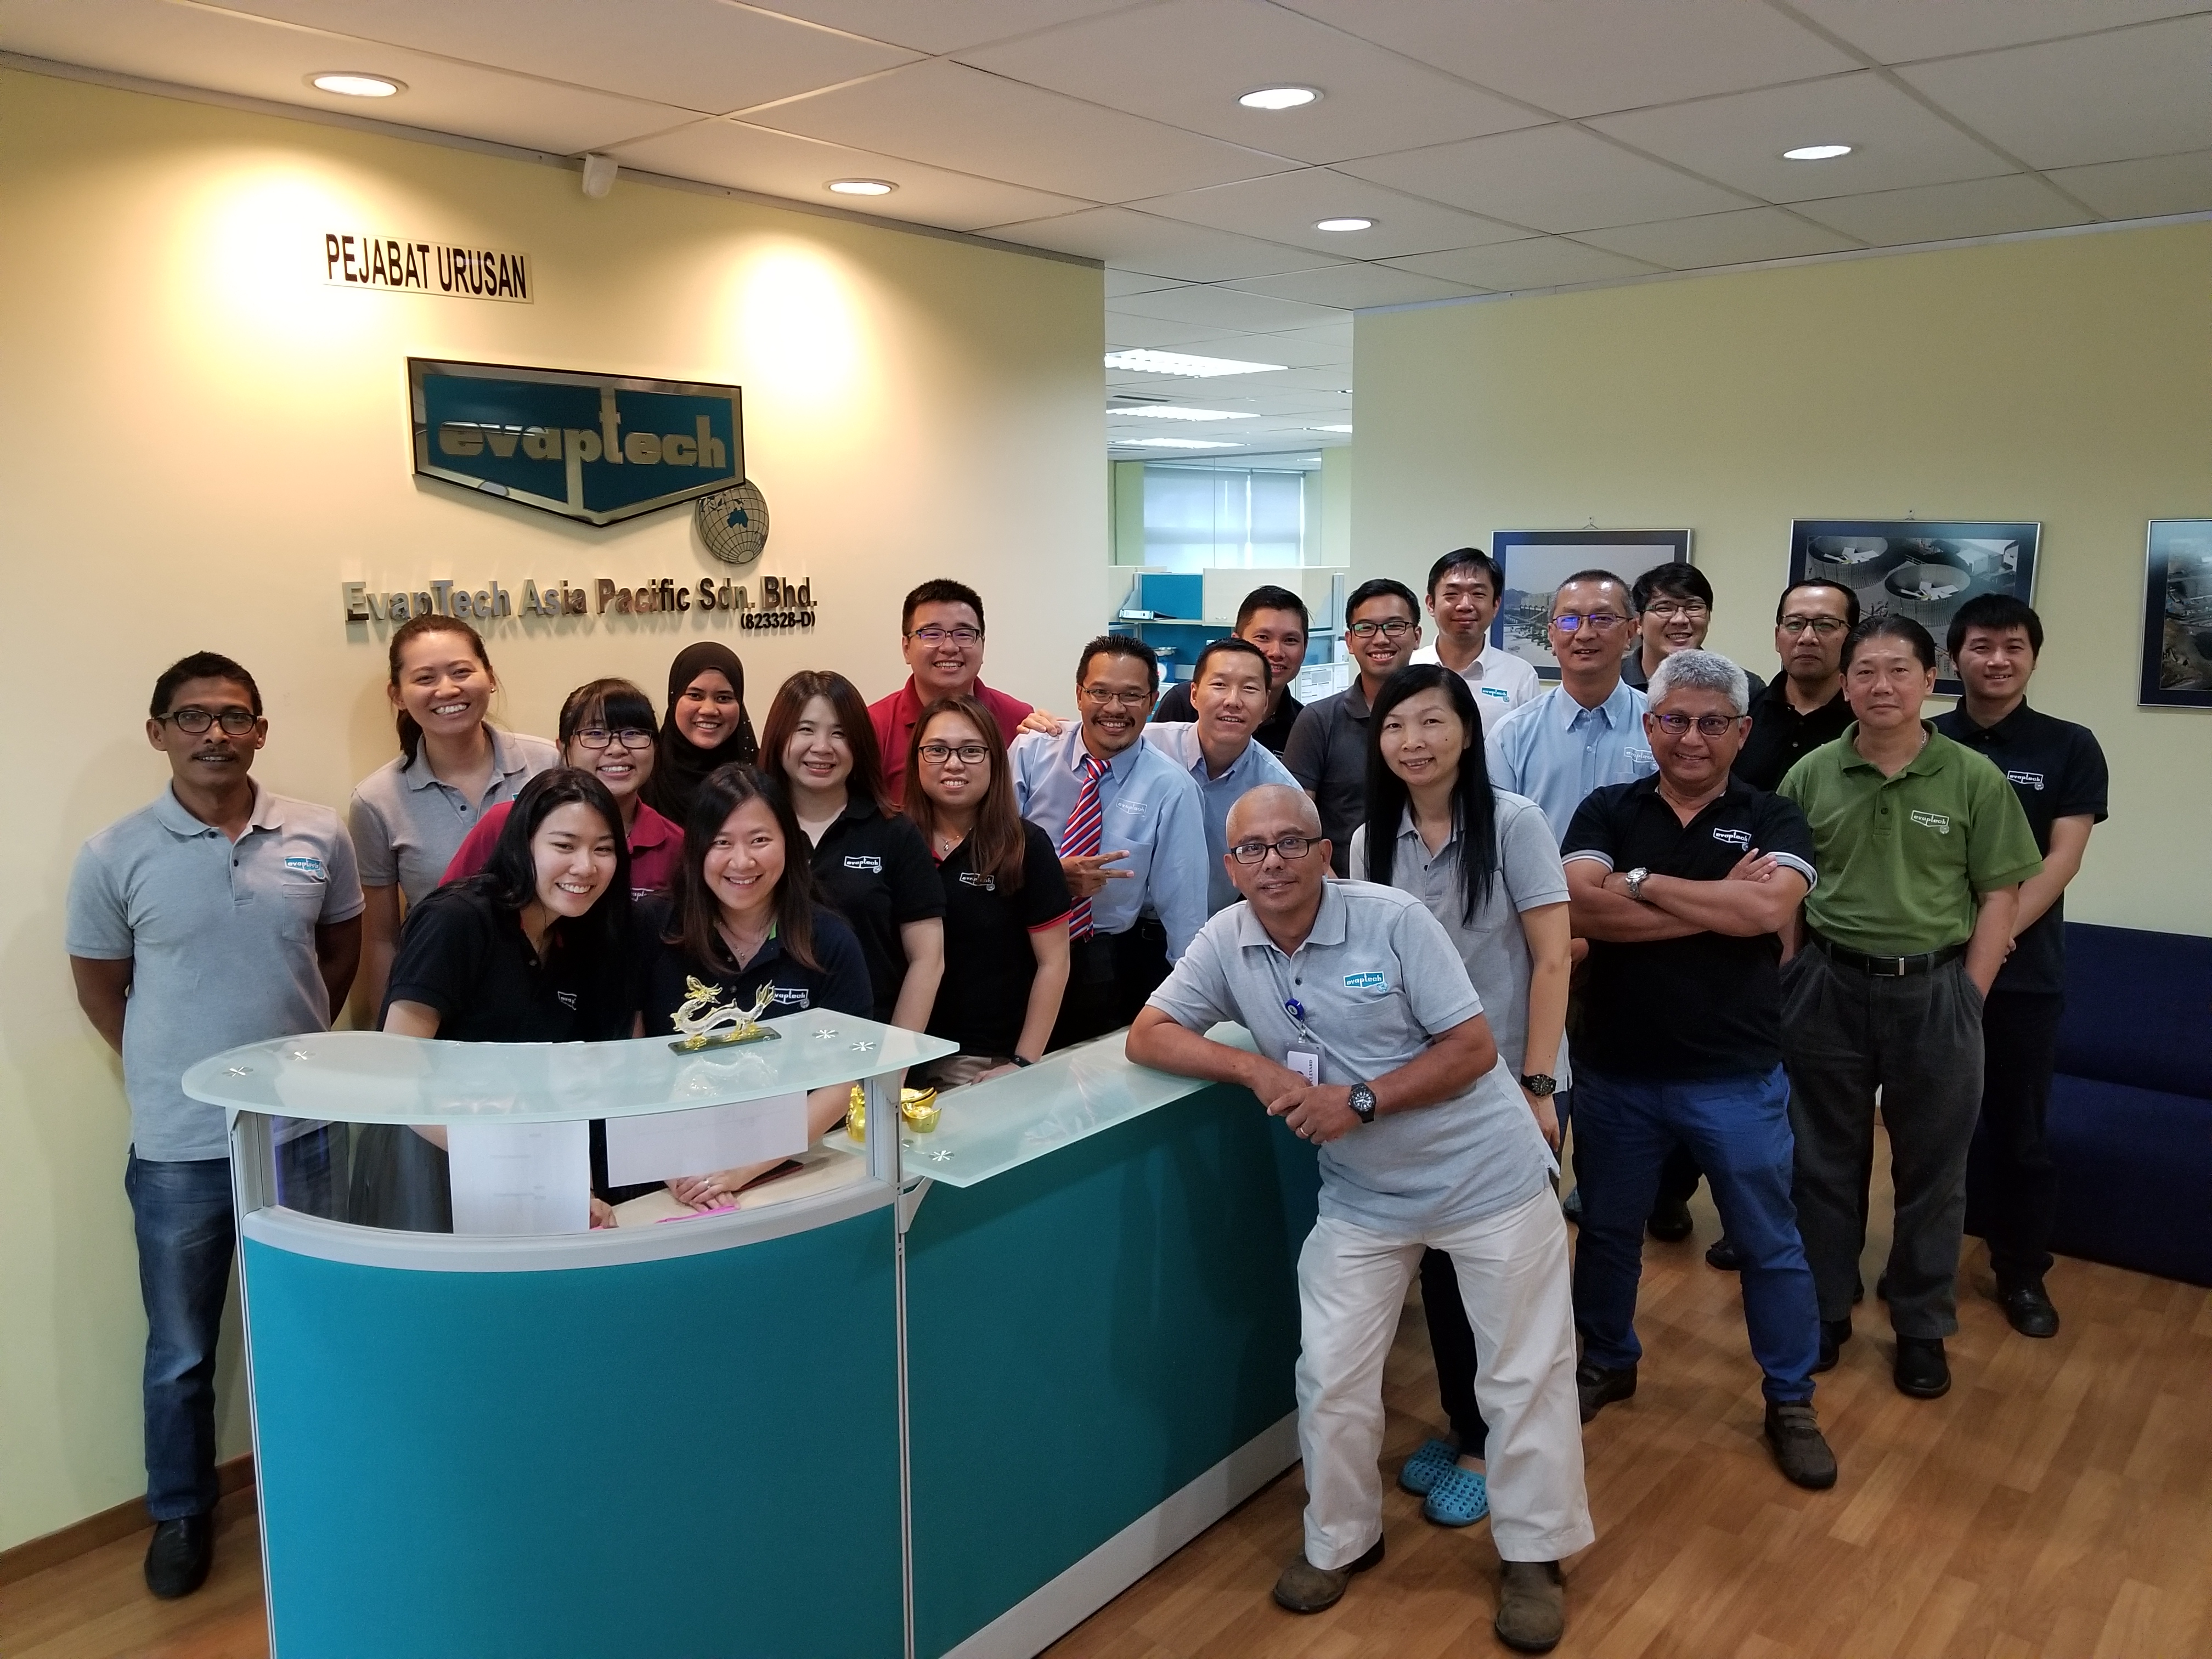 EvapTech Asia Pacific Sdn. Bhd. | Evaptech